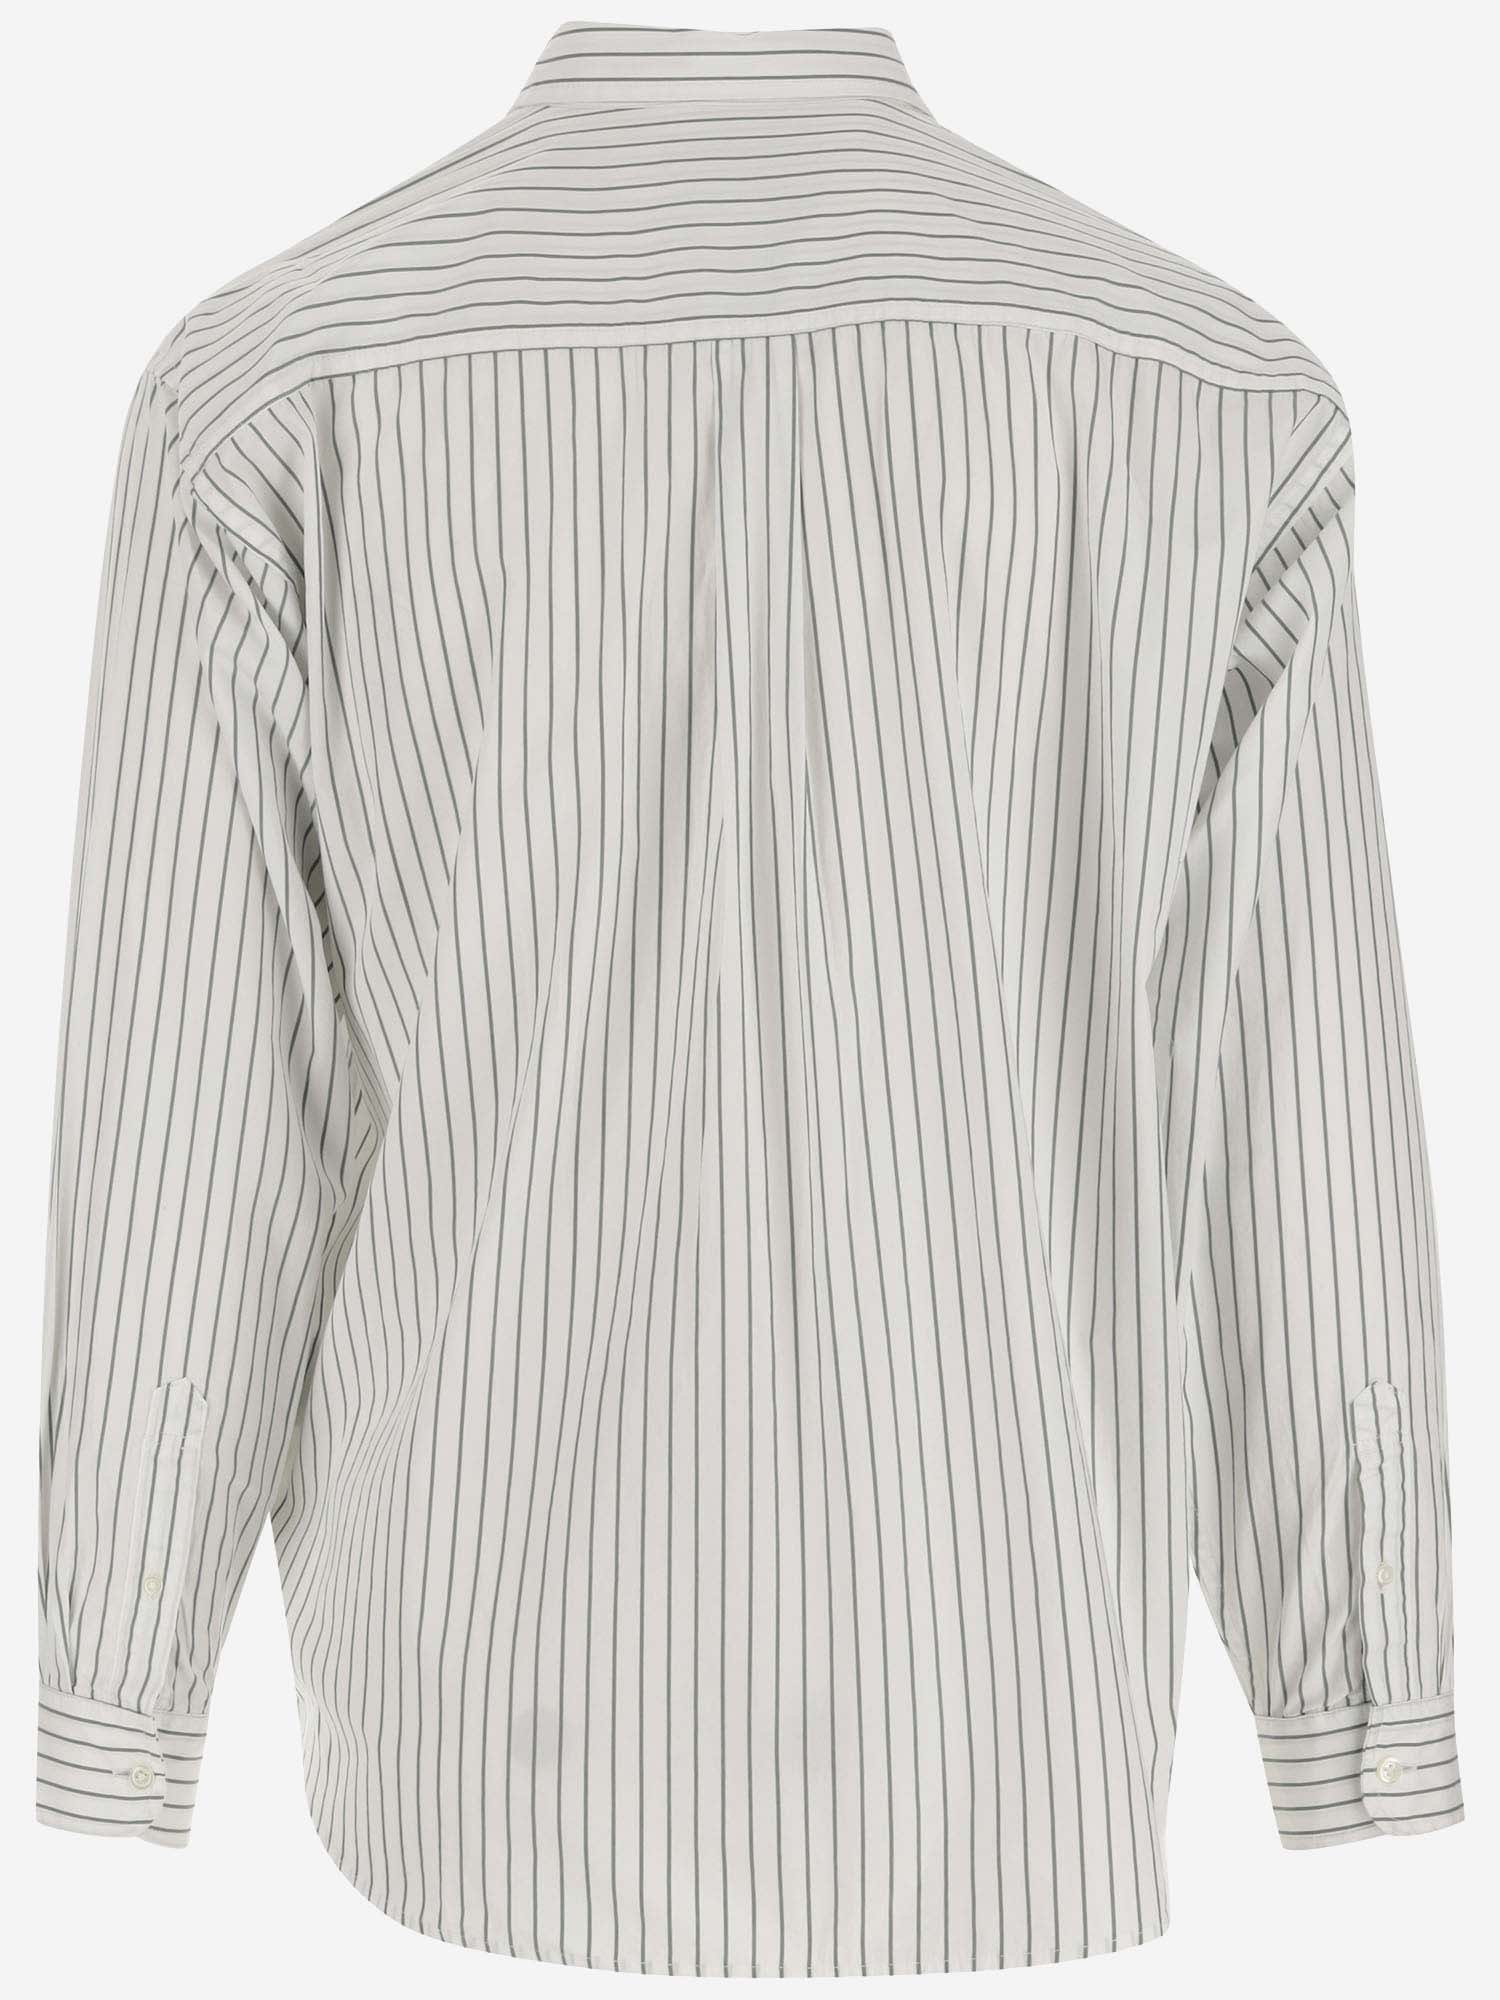 Shop Carhartt Cotton Shirt With Striped Pattern In Red